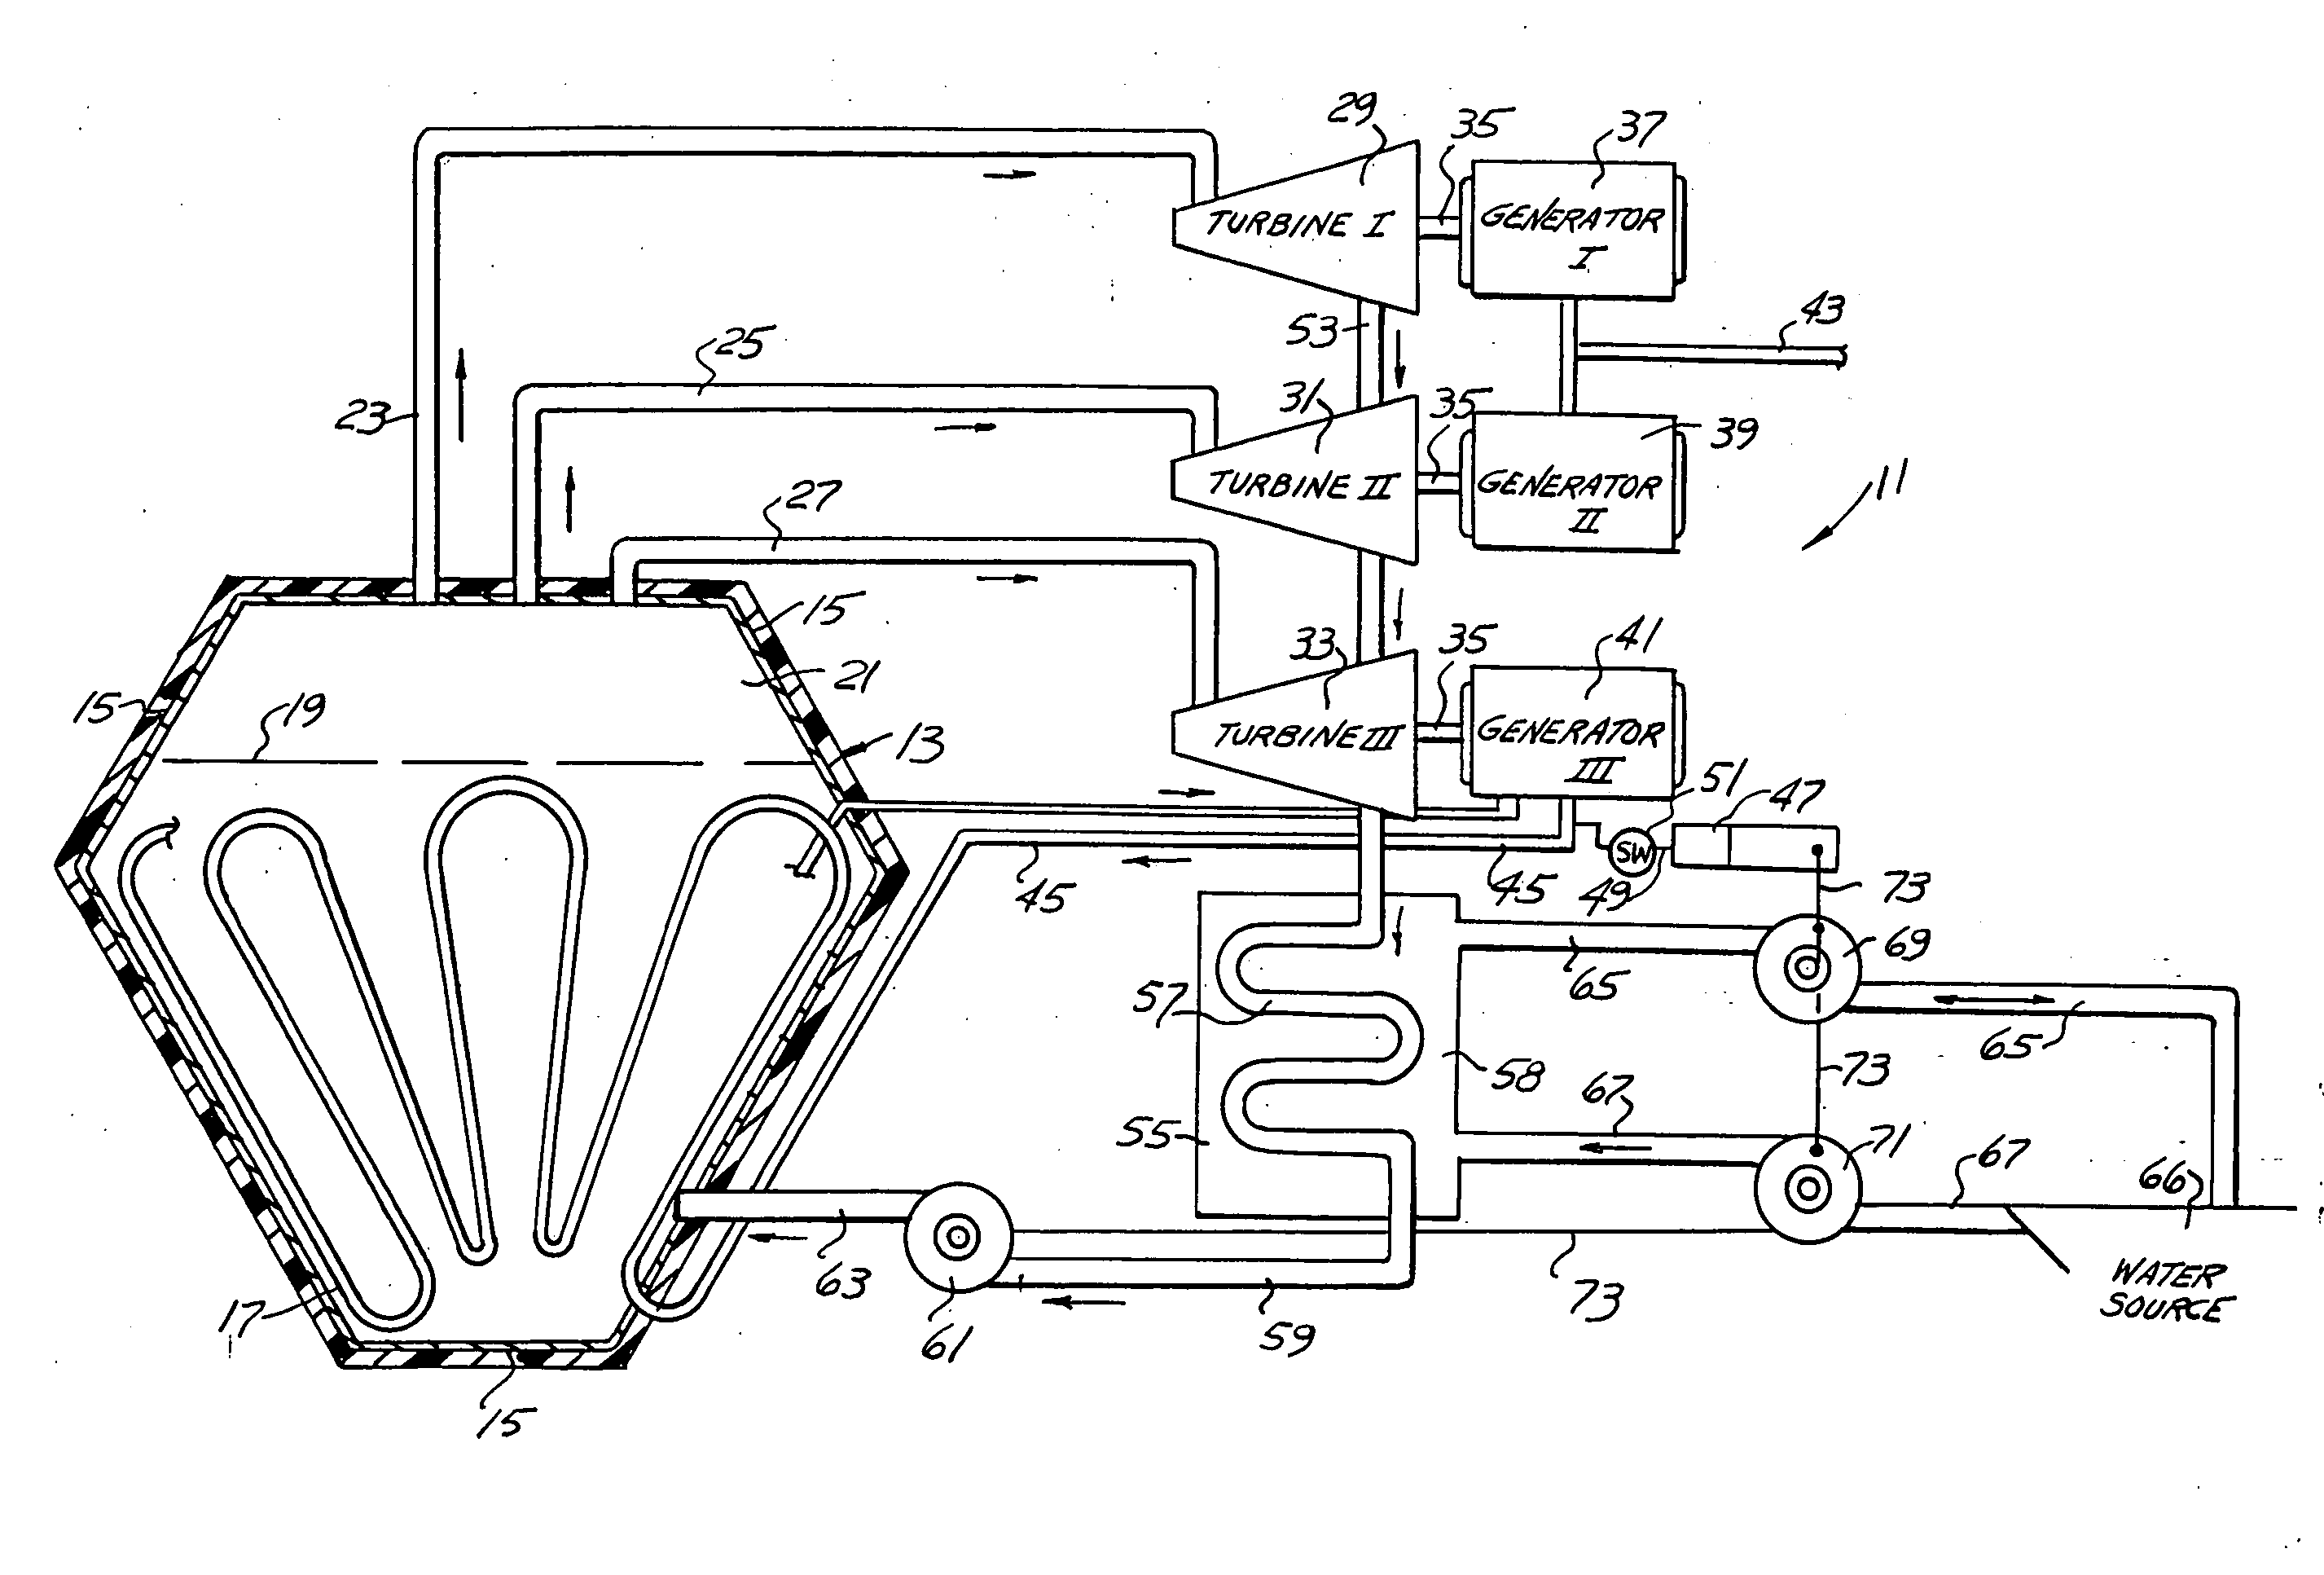 Electro-water reactor steam powered electric generator system